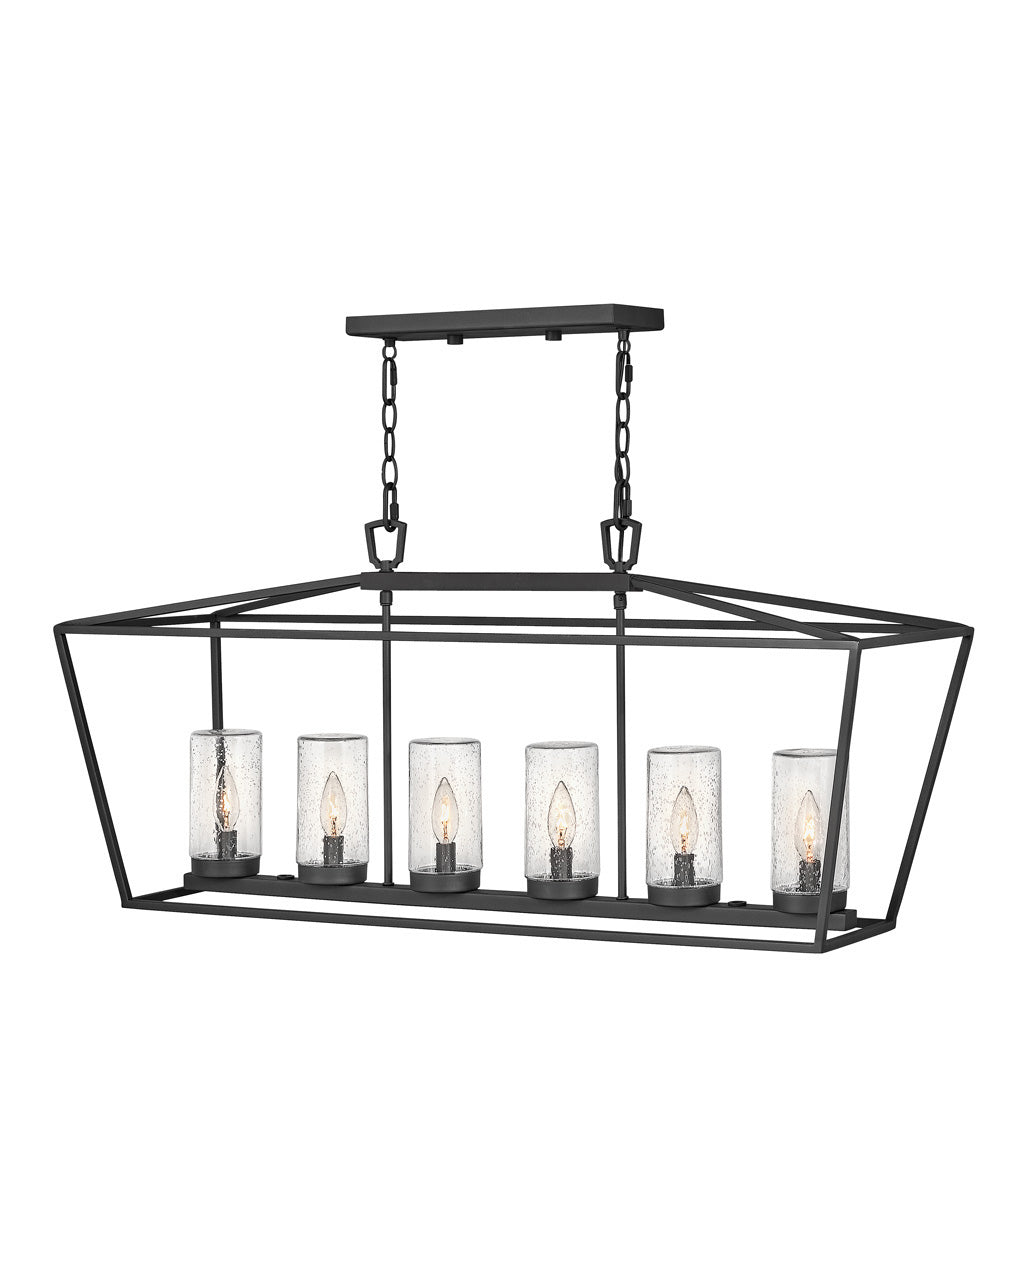 OUTDOOR ALFORD PLACE Light Linear